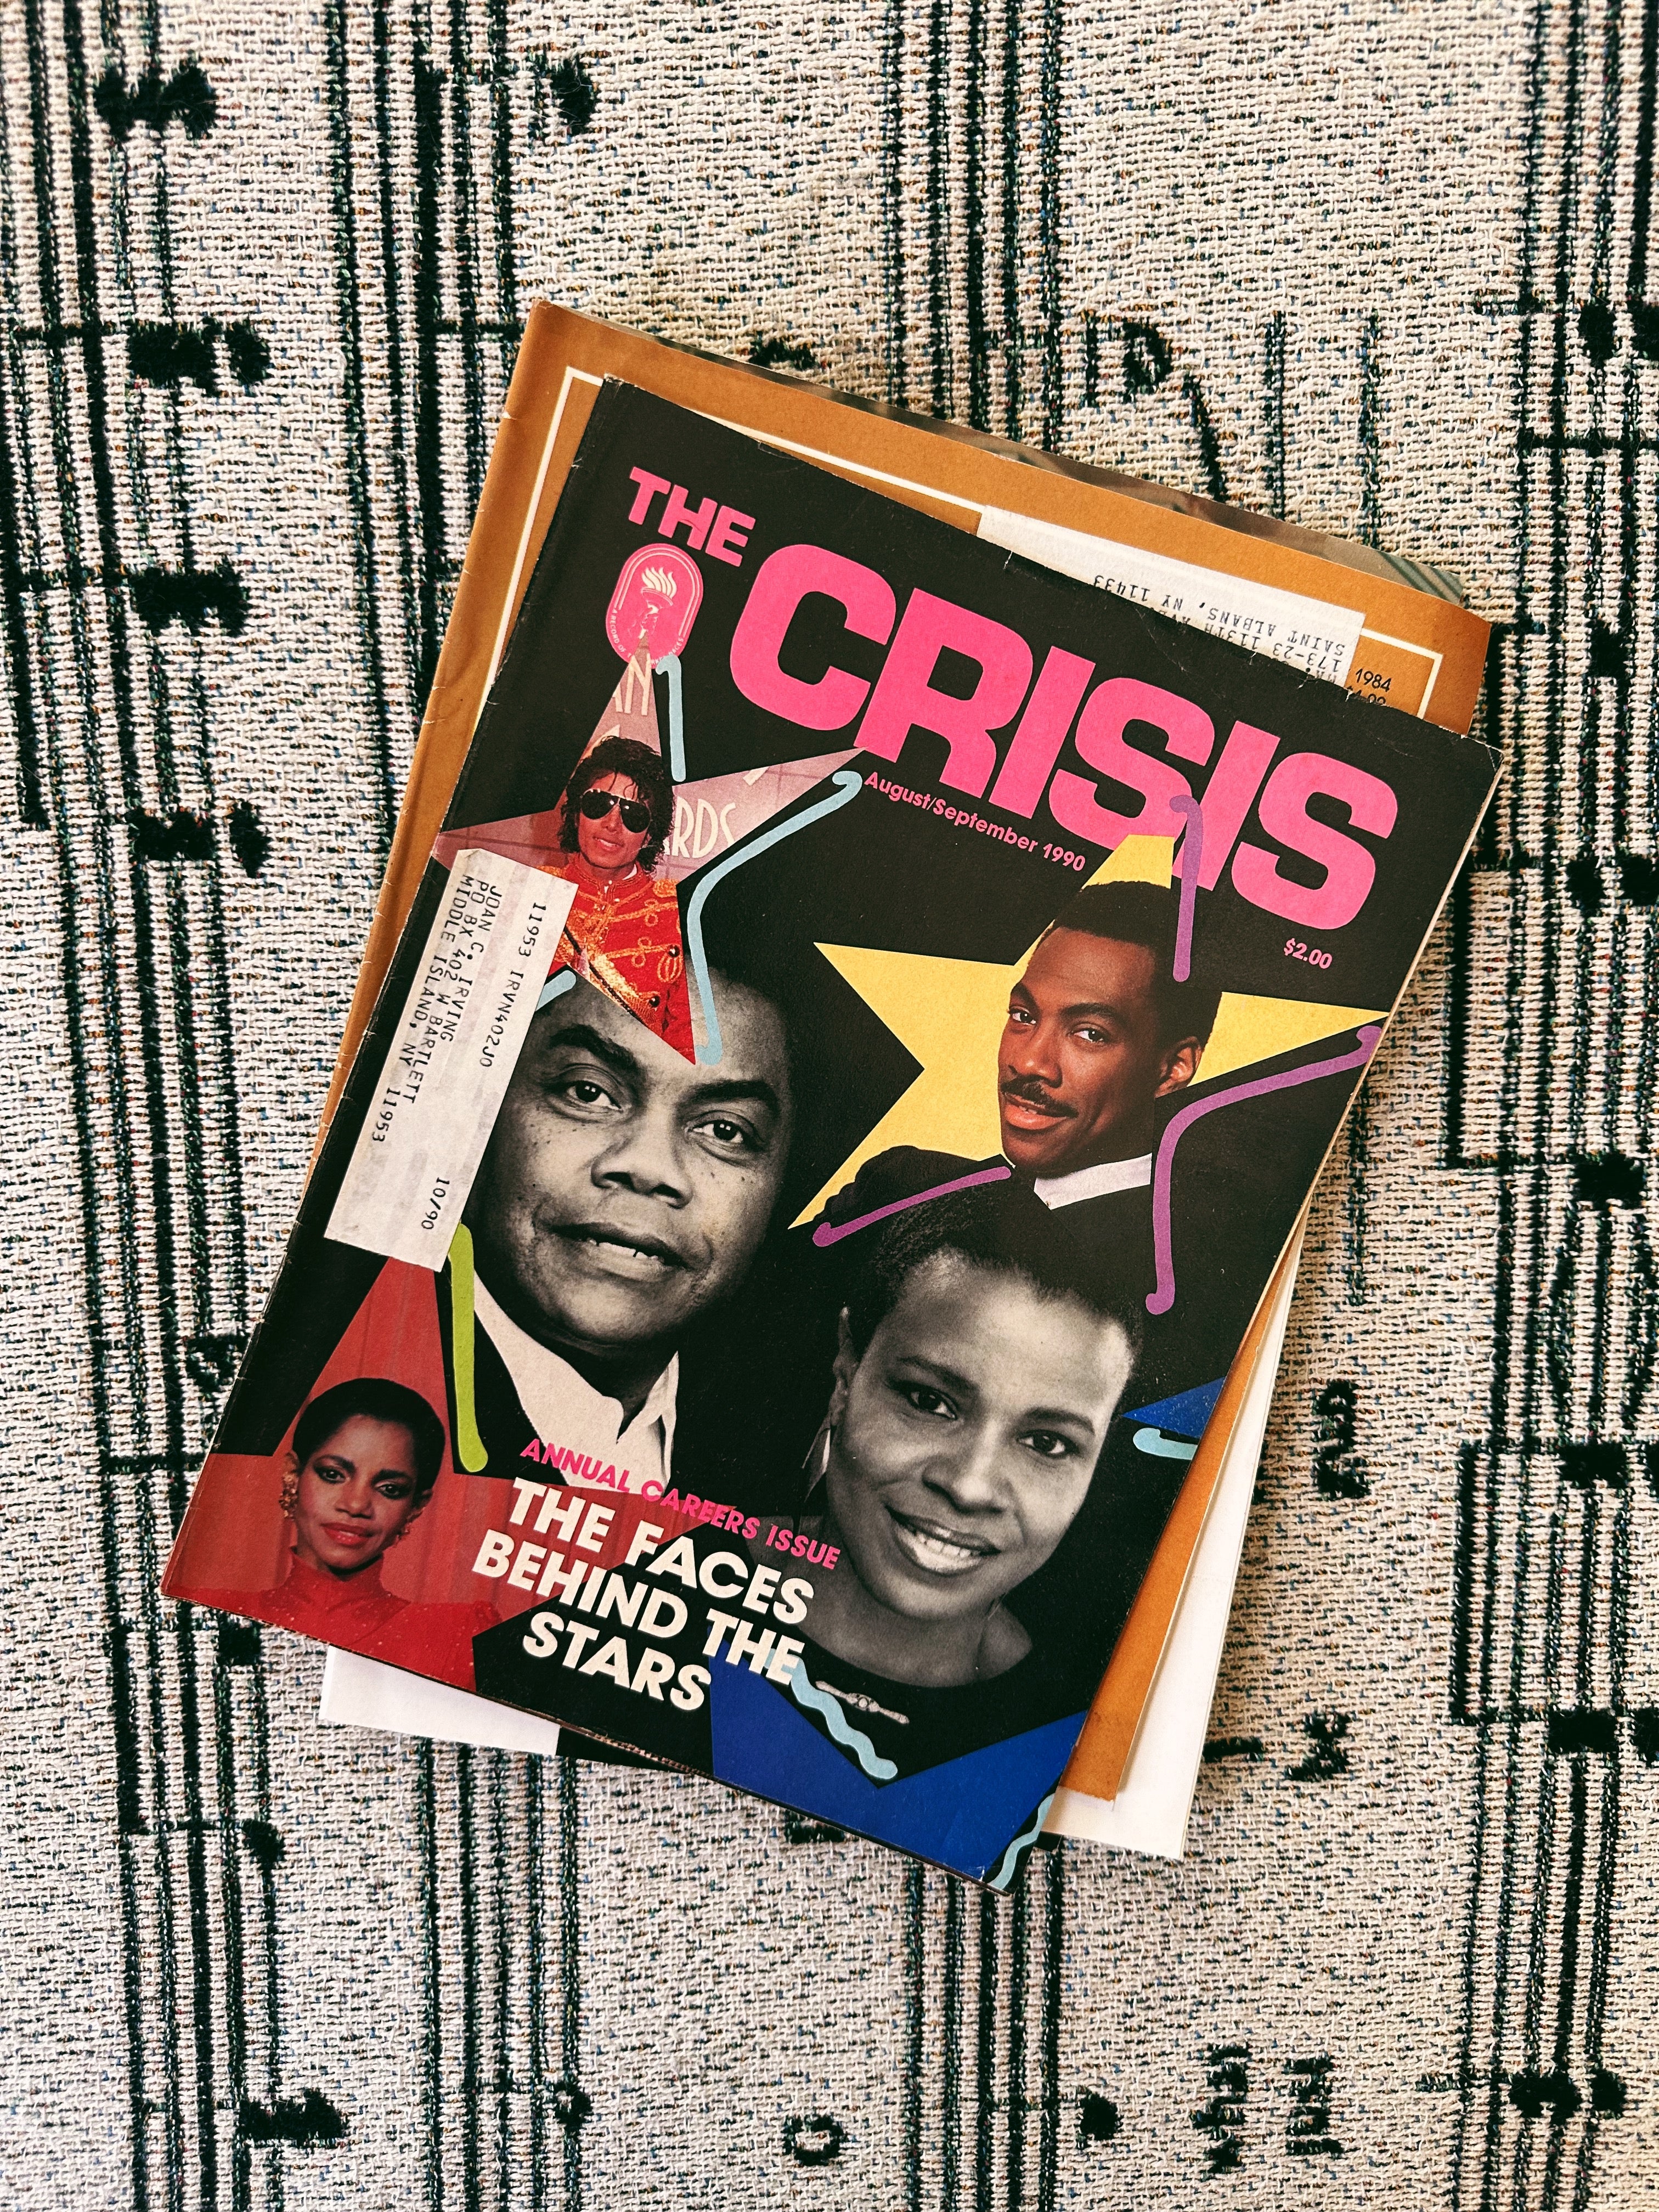 Vintage NAACP Crisis Magazine Issues (Please Select)